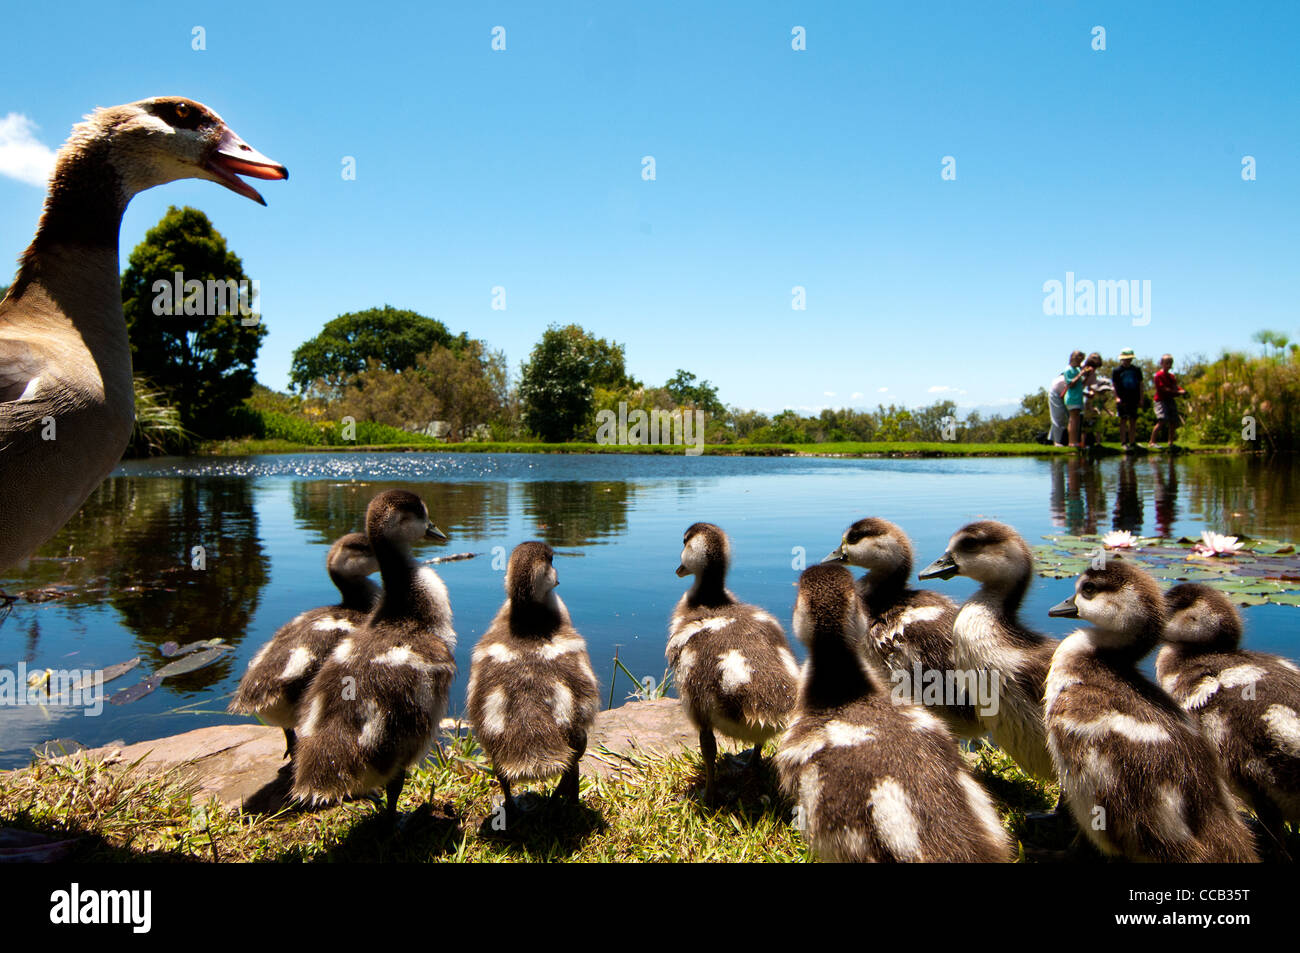 Egyptian geese in the Kirstenbosch Botanical Garden Duck Pond, Cape Town, South Africa Stock Photo